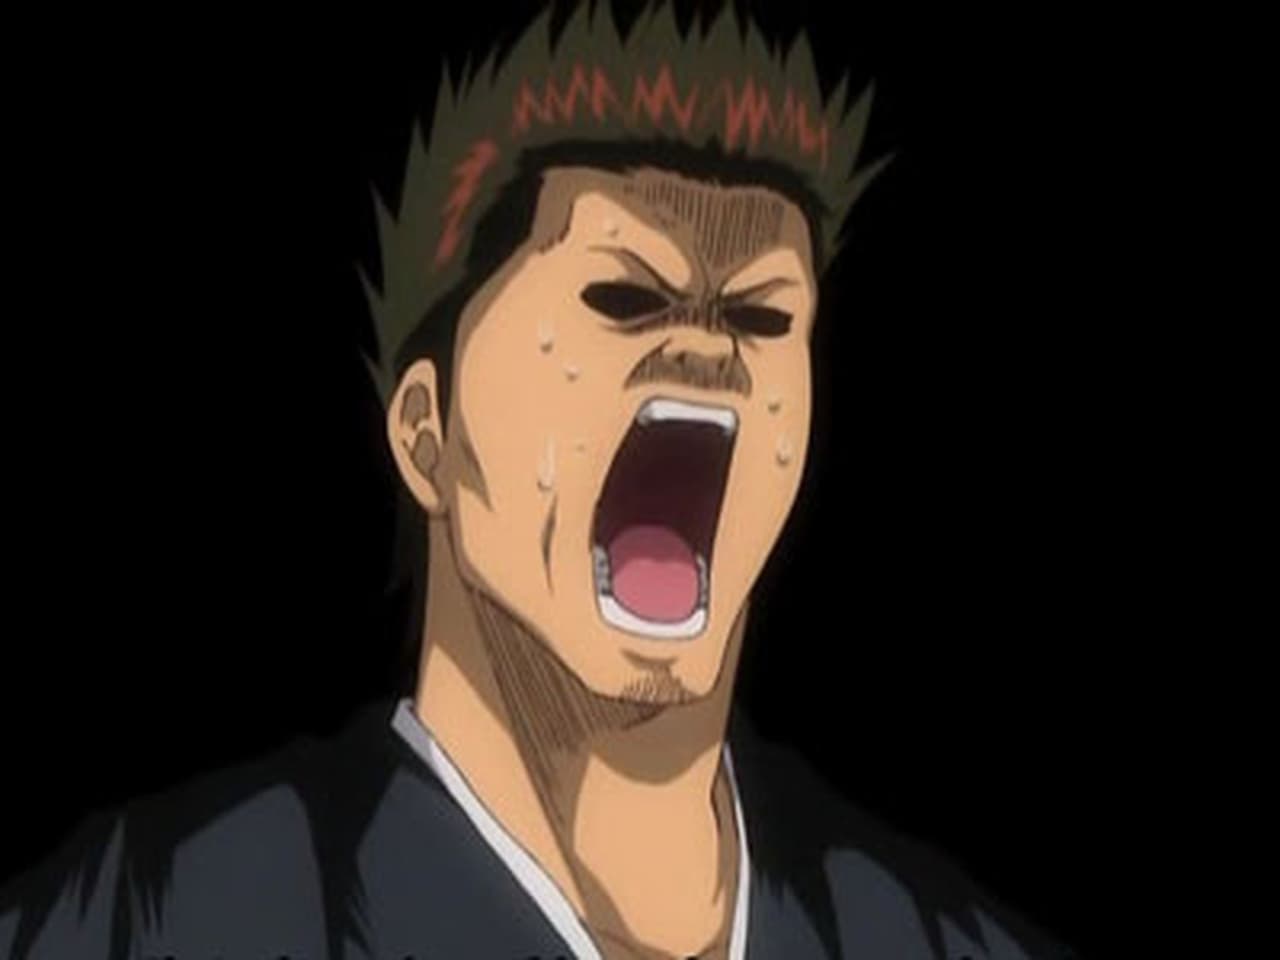 Gintama - Season 2 Episode 27 : In Those Situations, Keep Quiet and Cook Red Rice With Beans